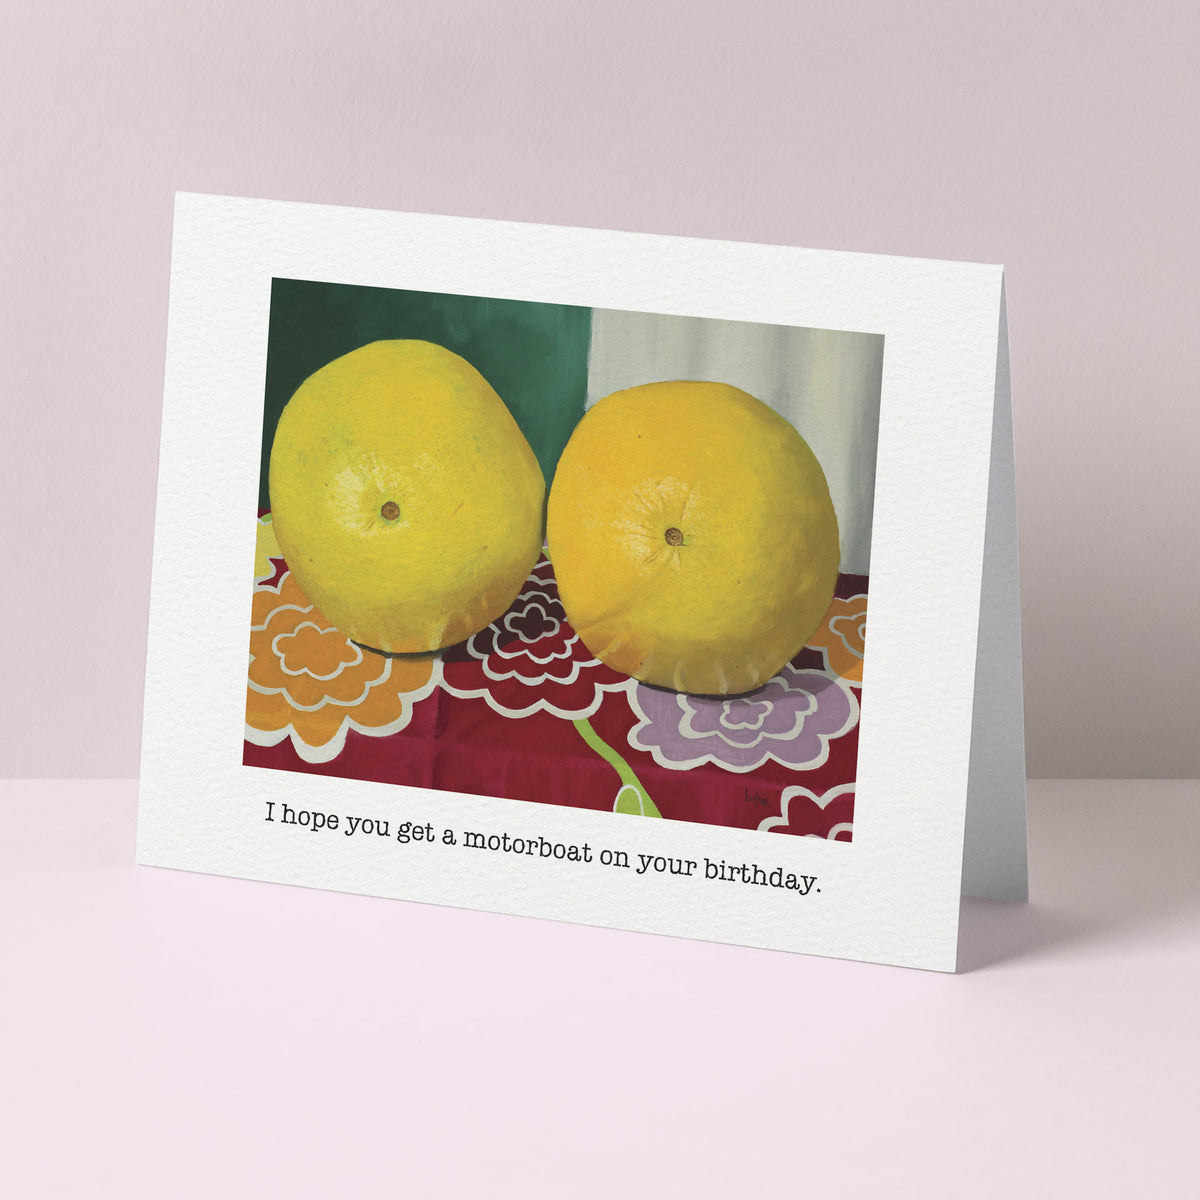 "I hope you get a motorboat on your birthday" Greeting Card